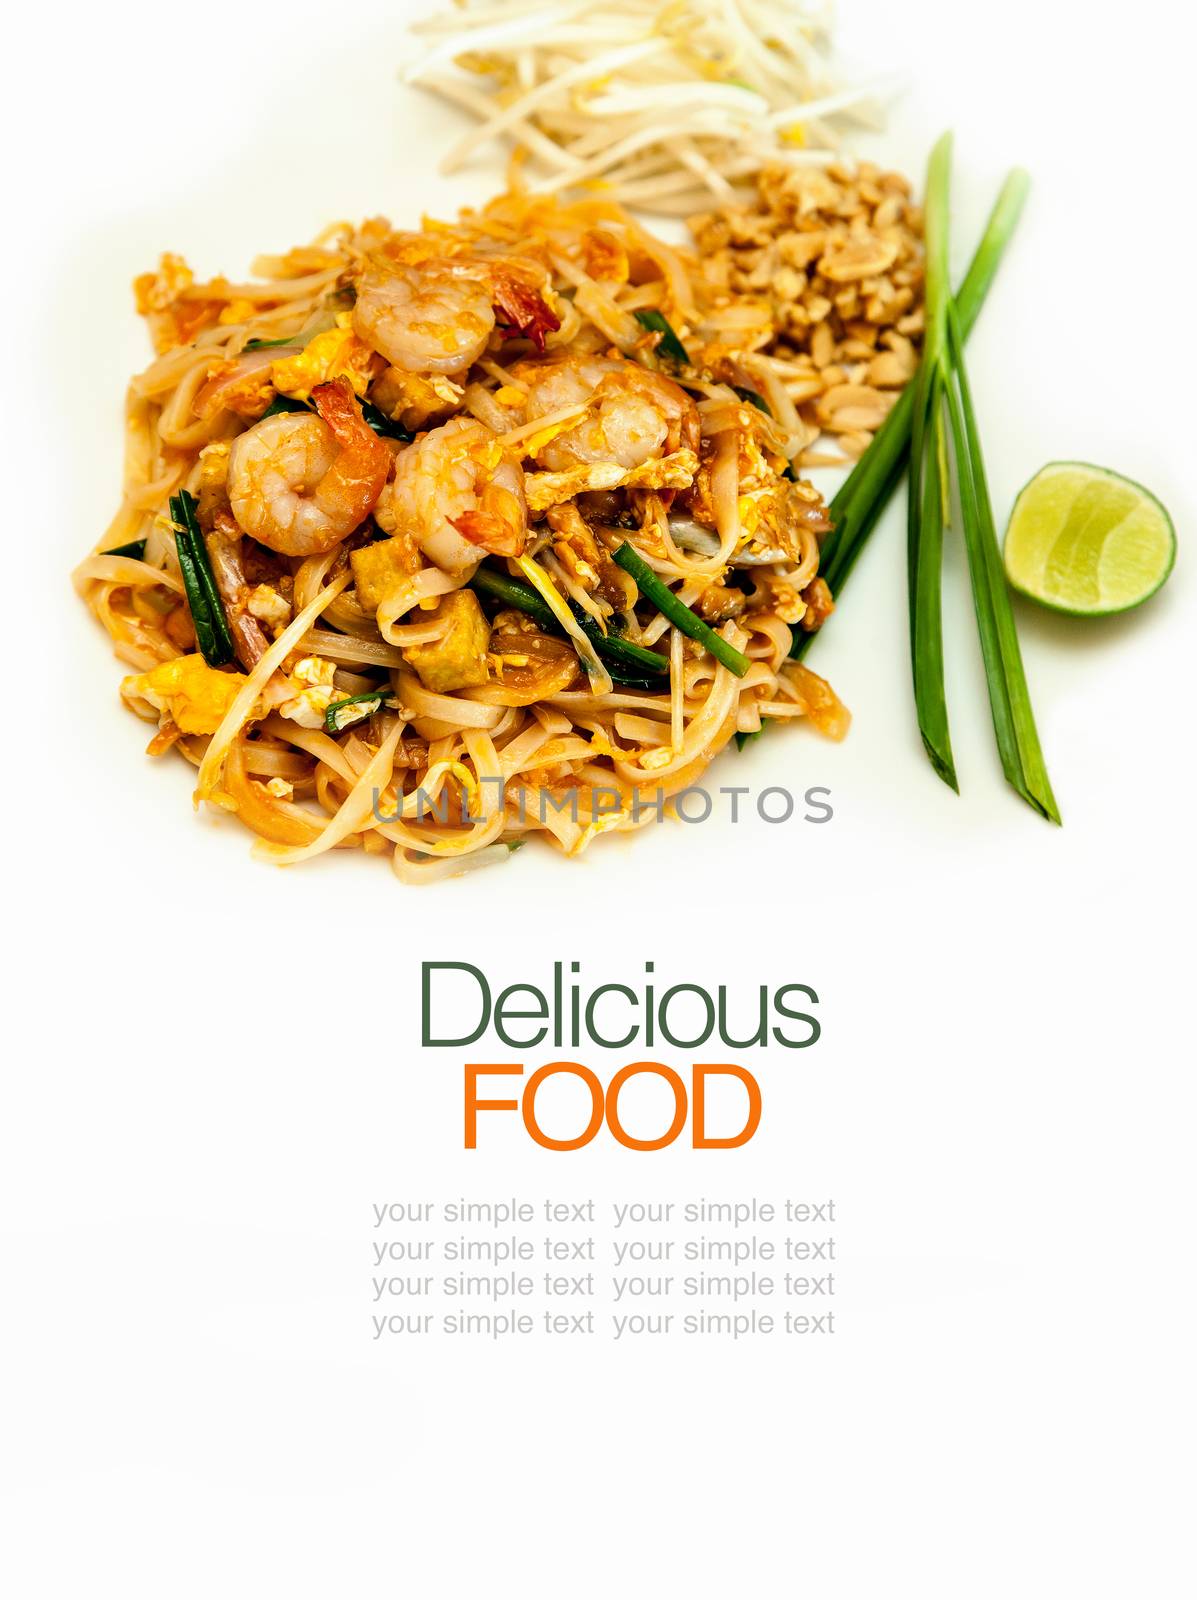 Fried noodle thai style with tamarin and chilies sauce .(Pad thai)